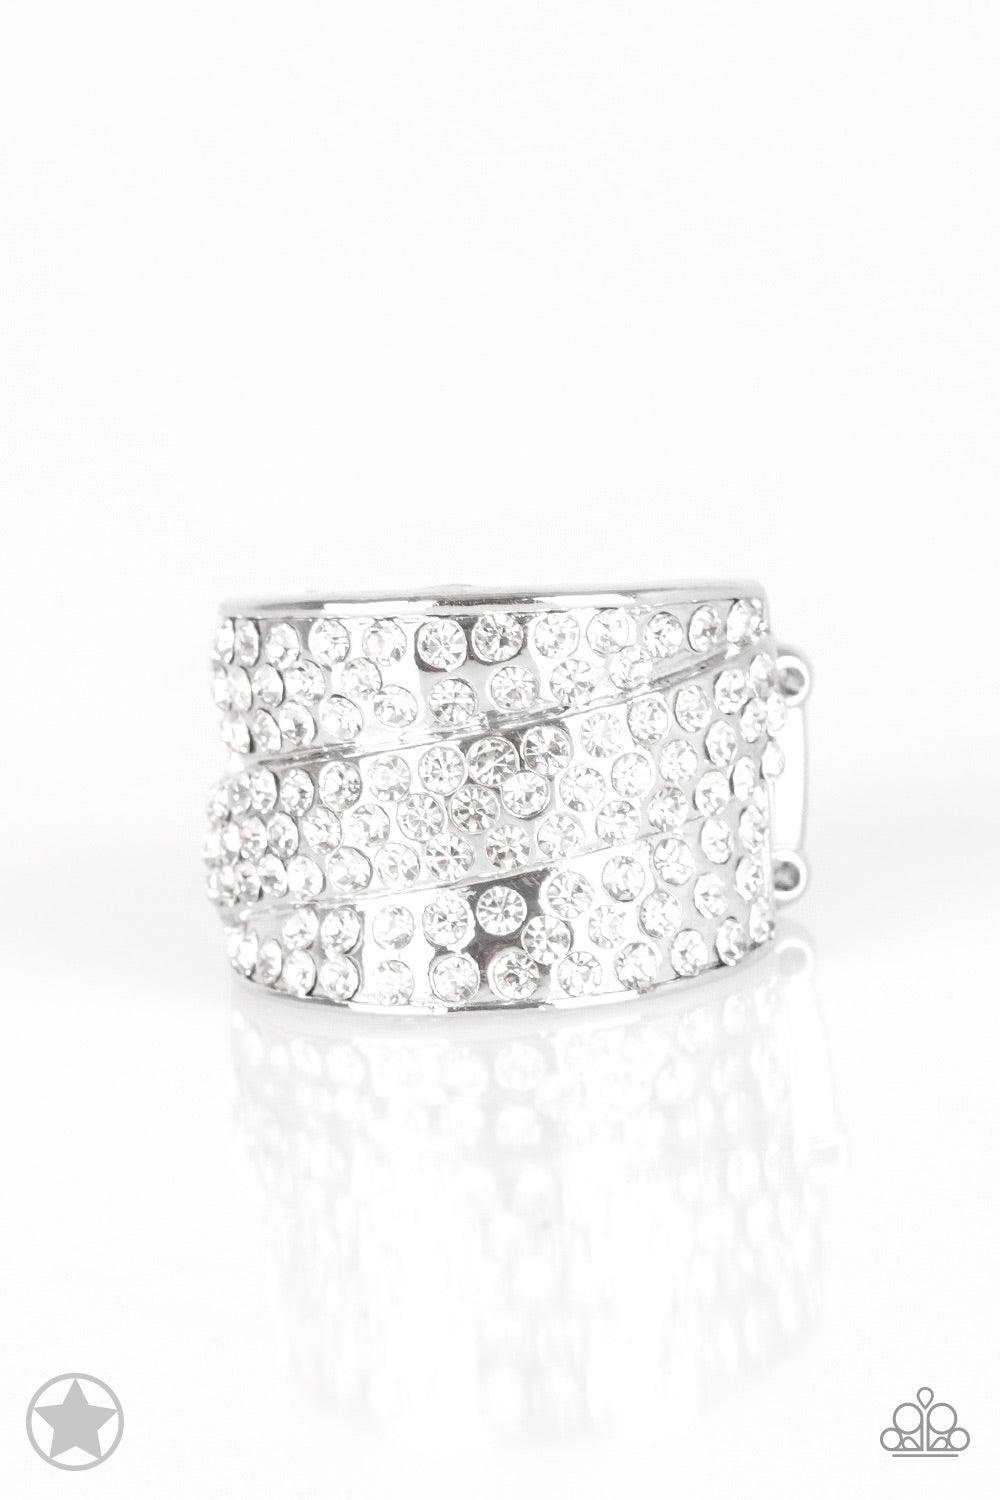 The Millionaires Club - White - Beautifully Blinged